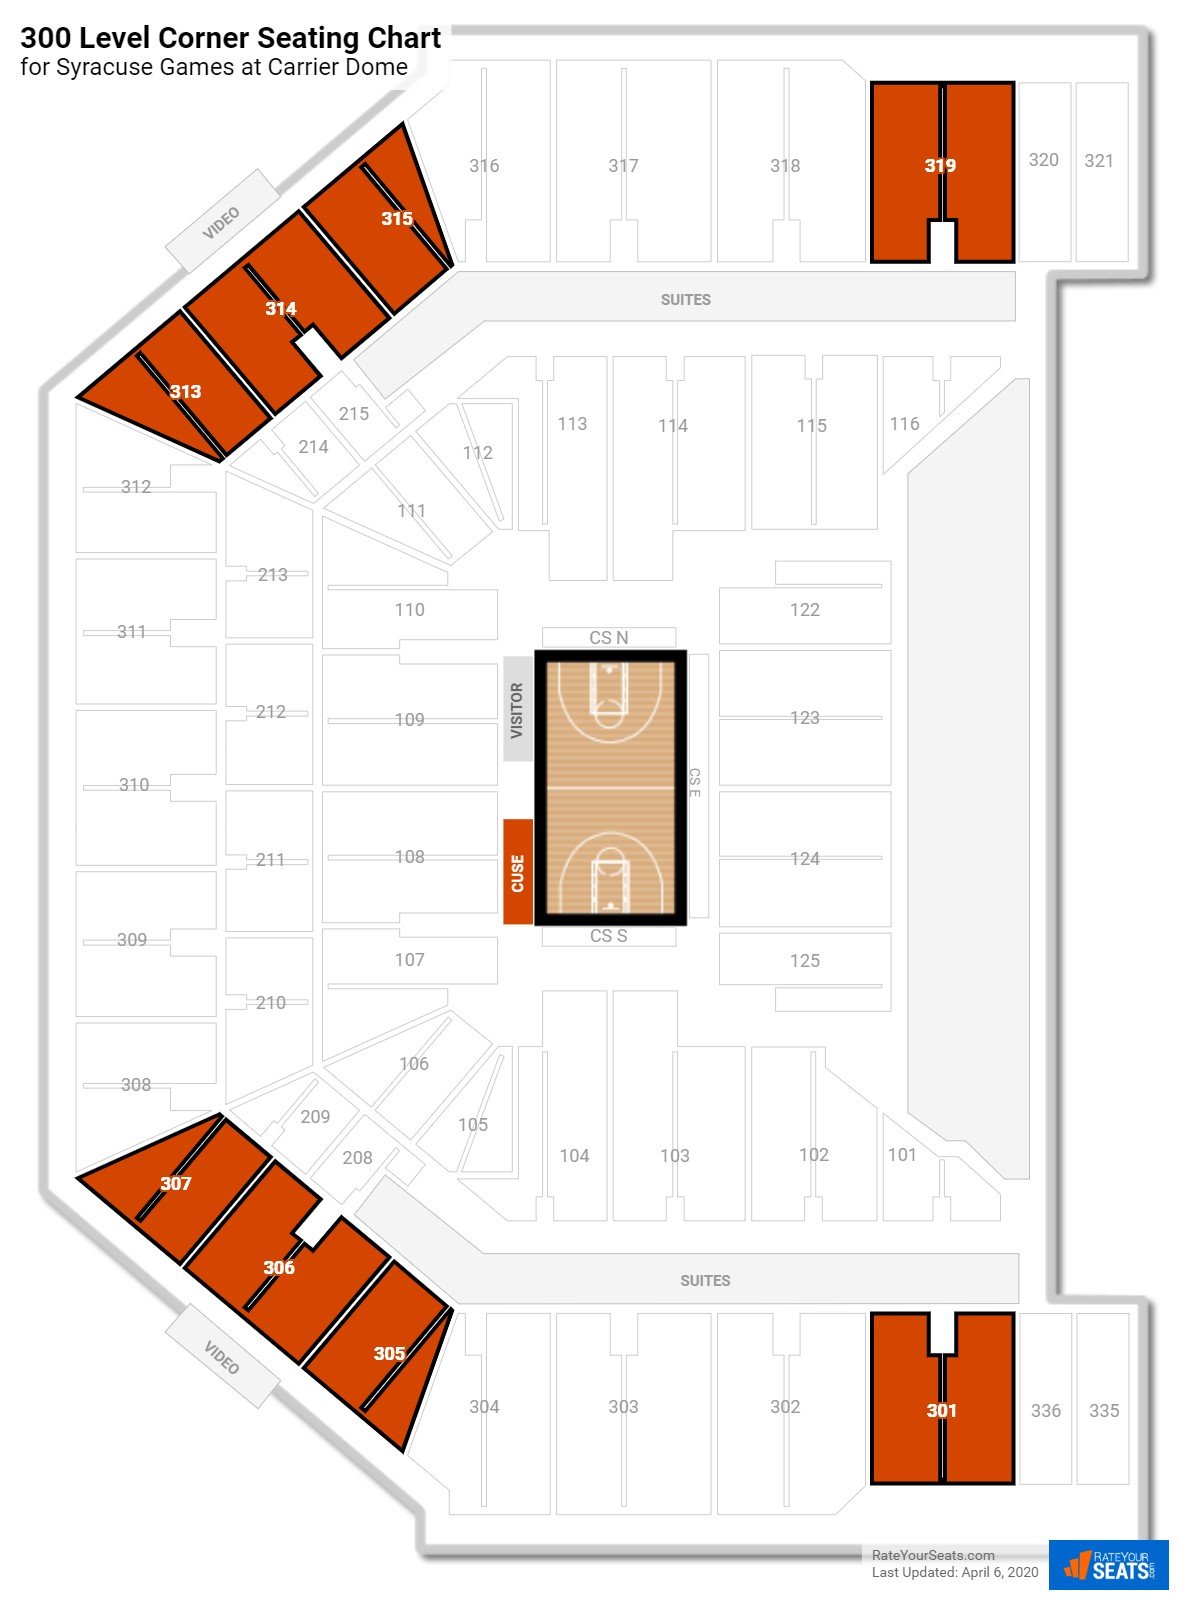 Carrier Dome Seating Chart